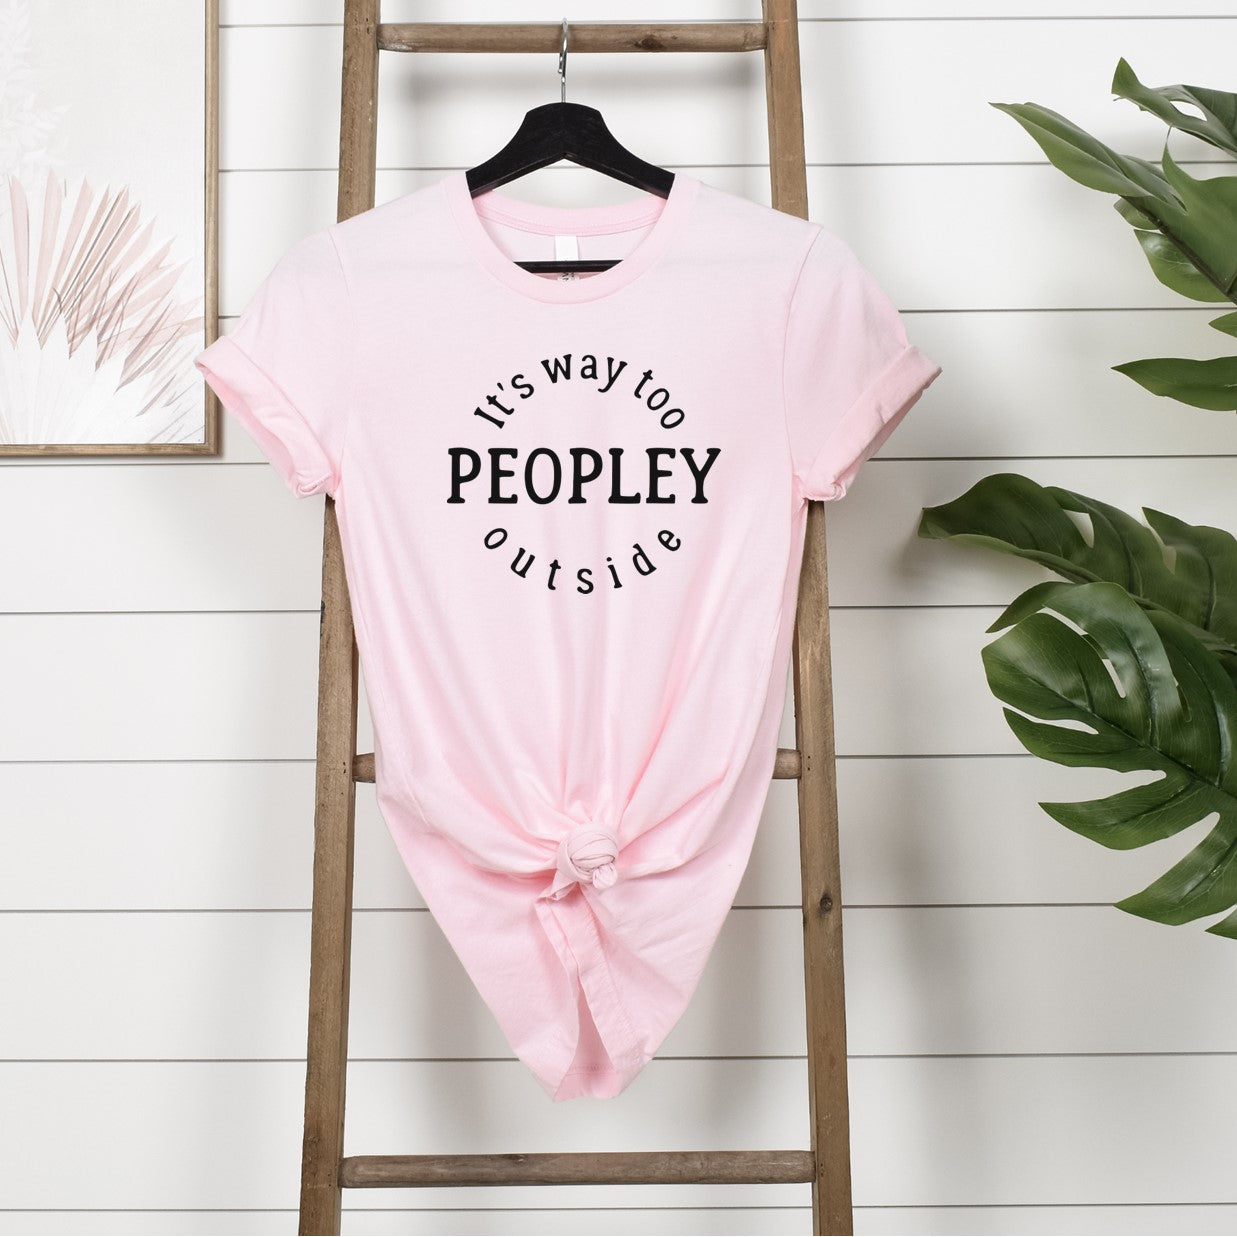 It's too peopley out there tee